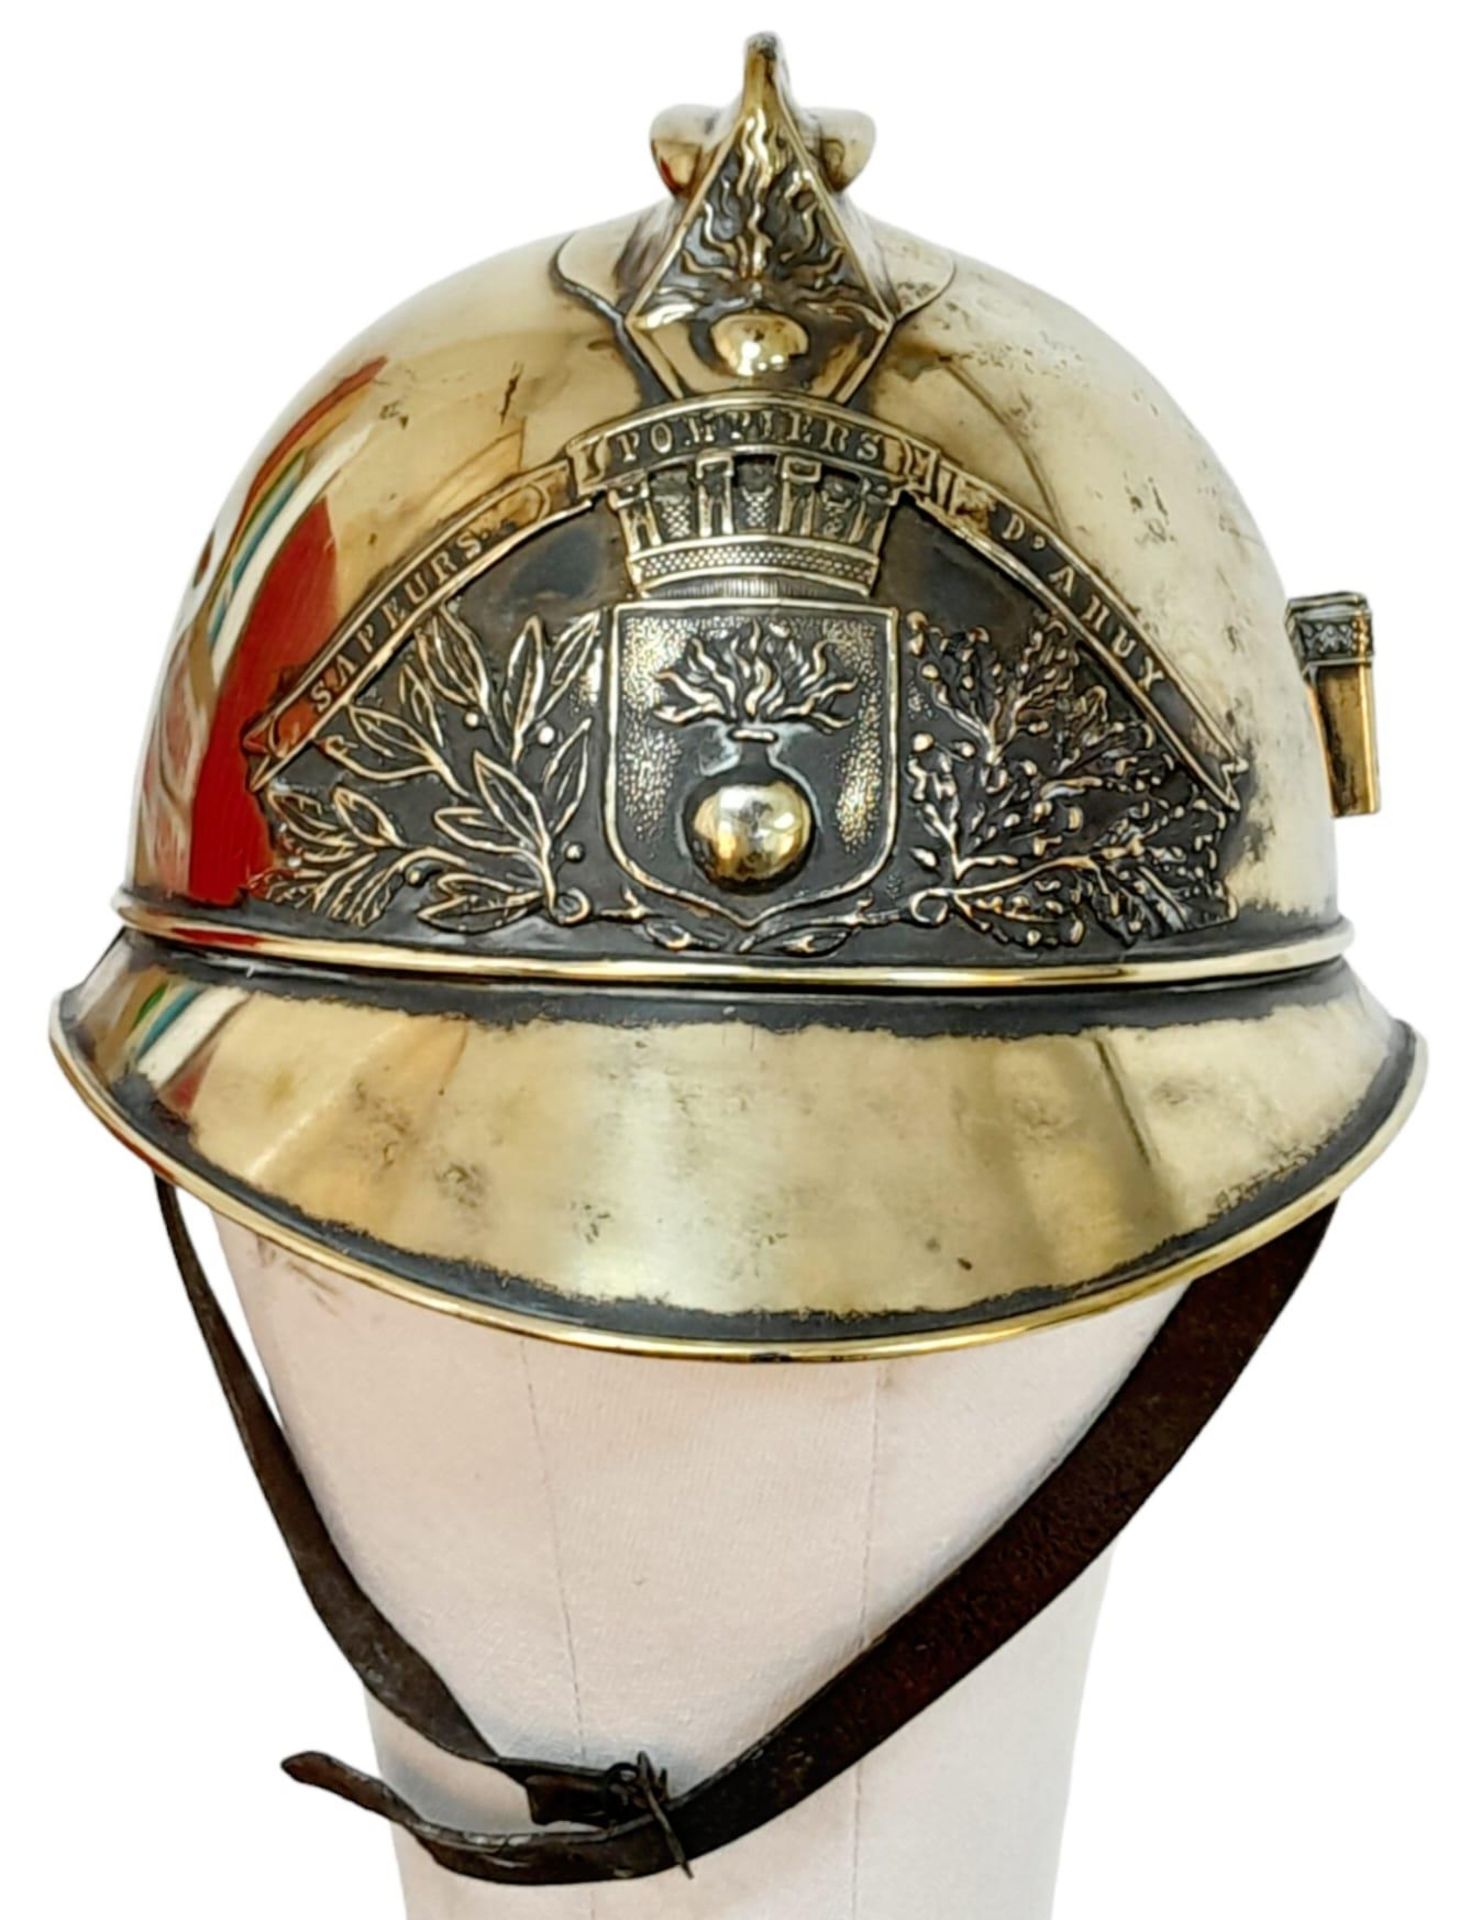 A Late 19th Century French Fireman's Brass Ornate Helmet. With original liner. - Image 2 of 4